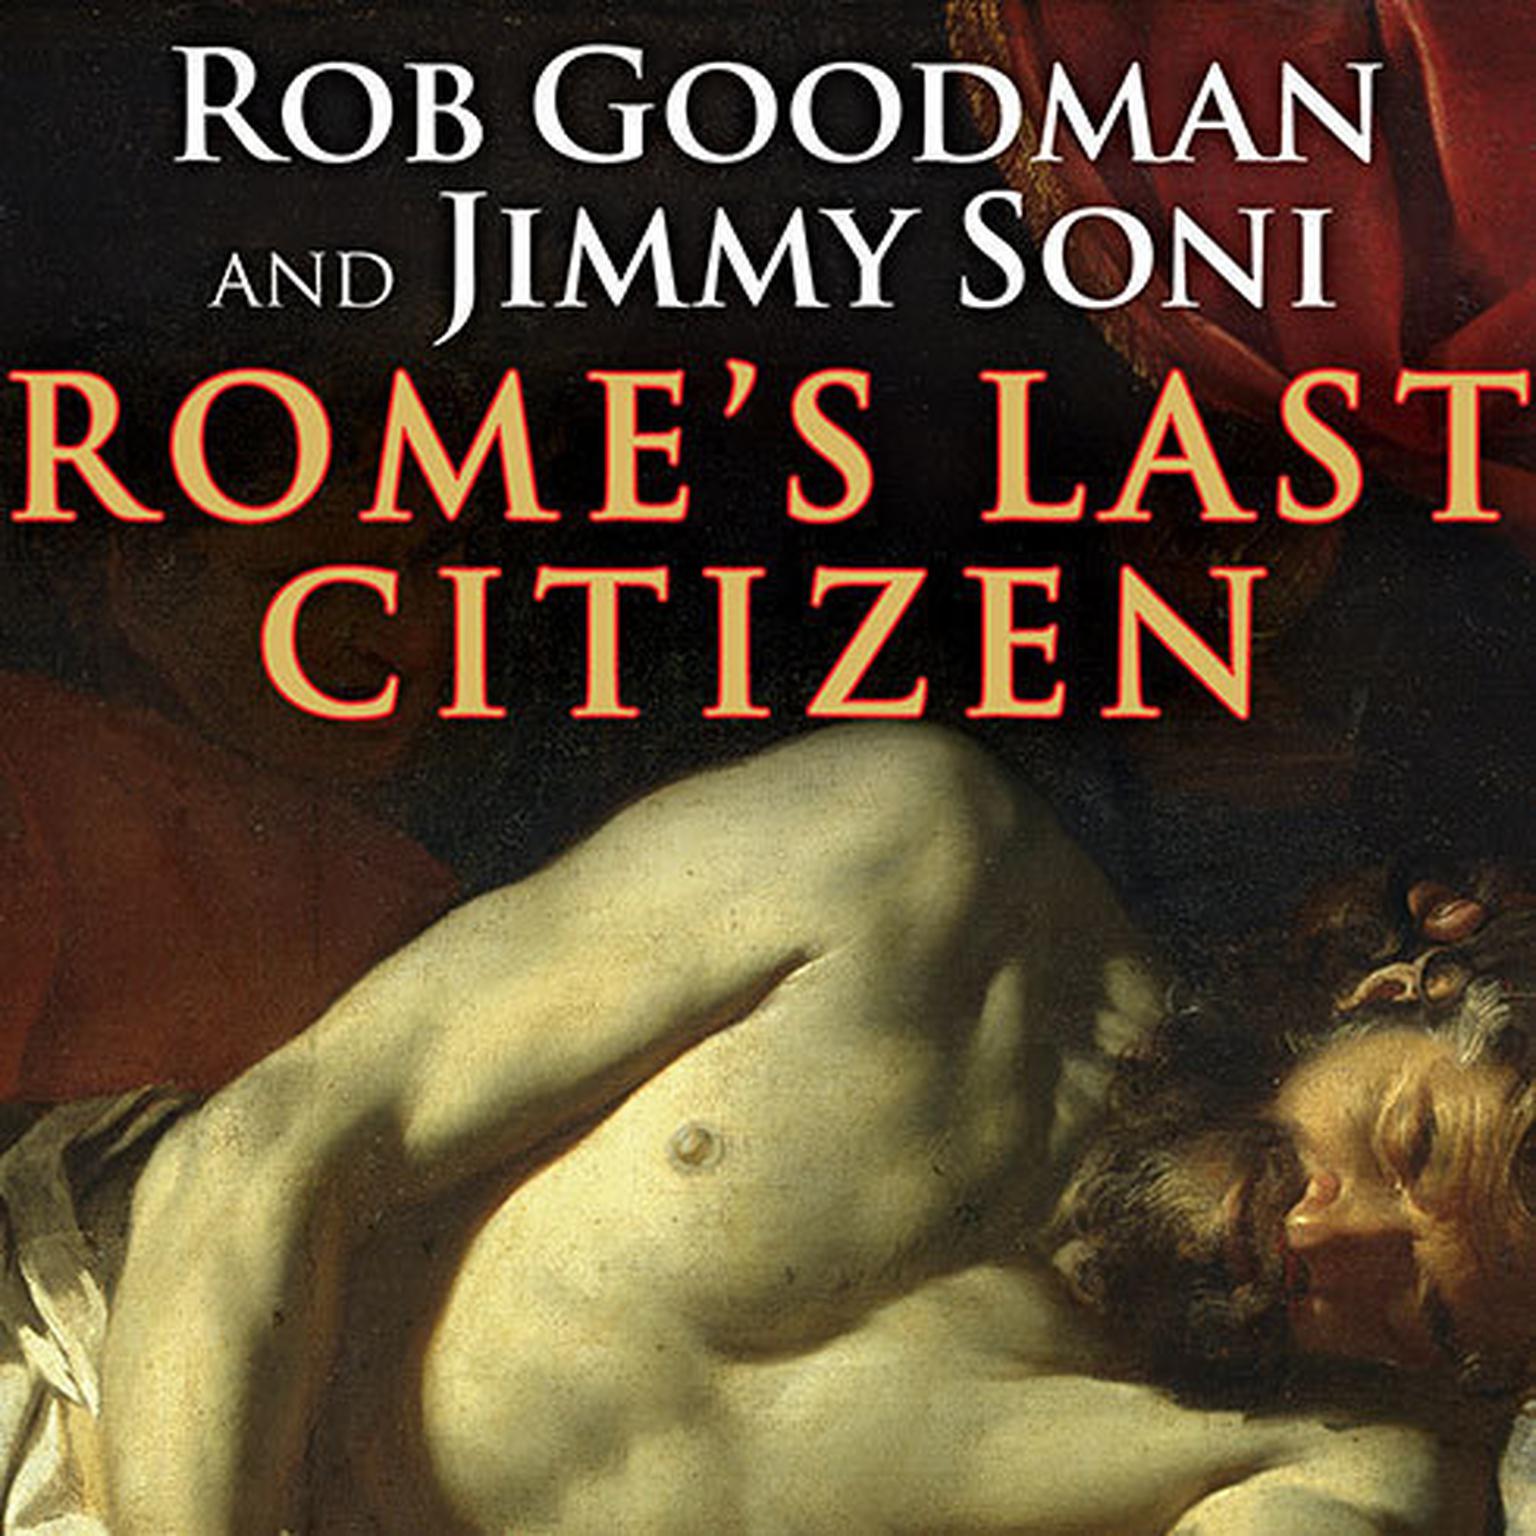 Romes Last Citizen: The Life and Legacy of Cato, Mortal Enemy of Caesar Audiobook, by Rob Goodman